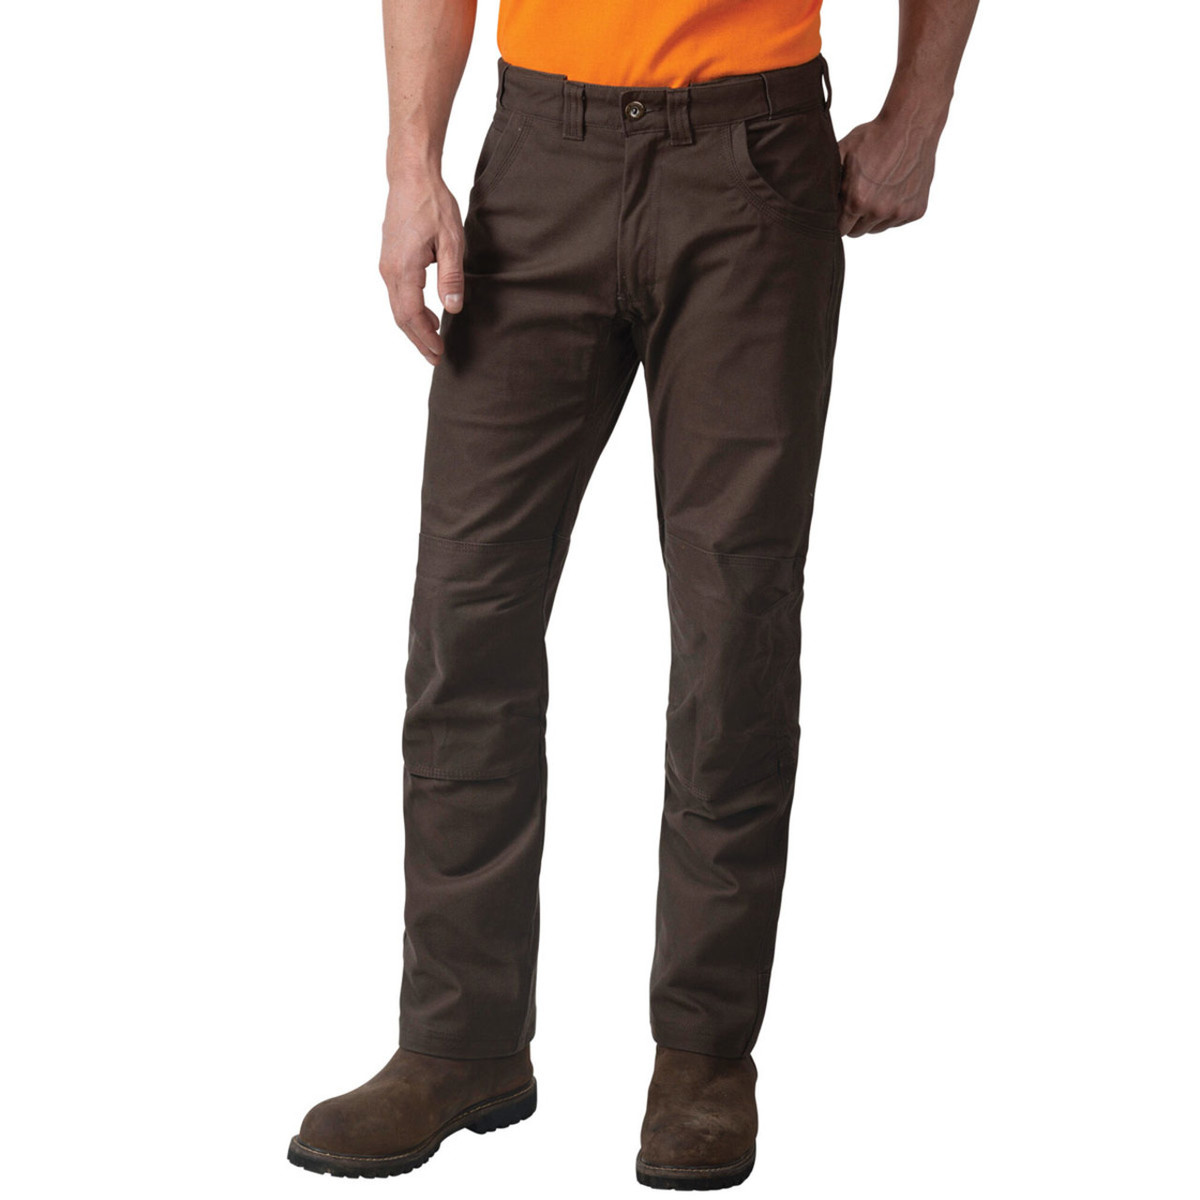 Ditchdigger Pro Double-Knee DWR Stretch Duck Work Pants